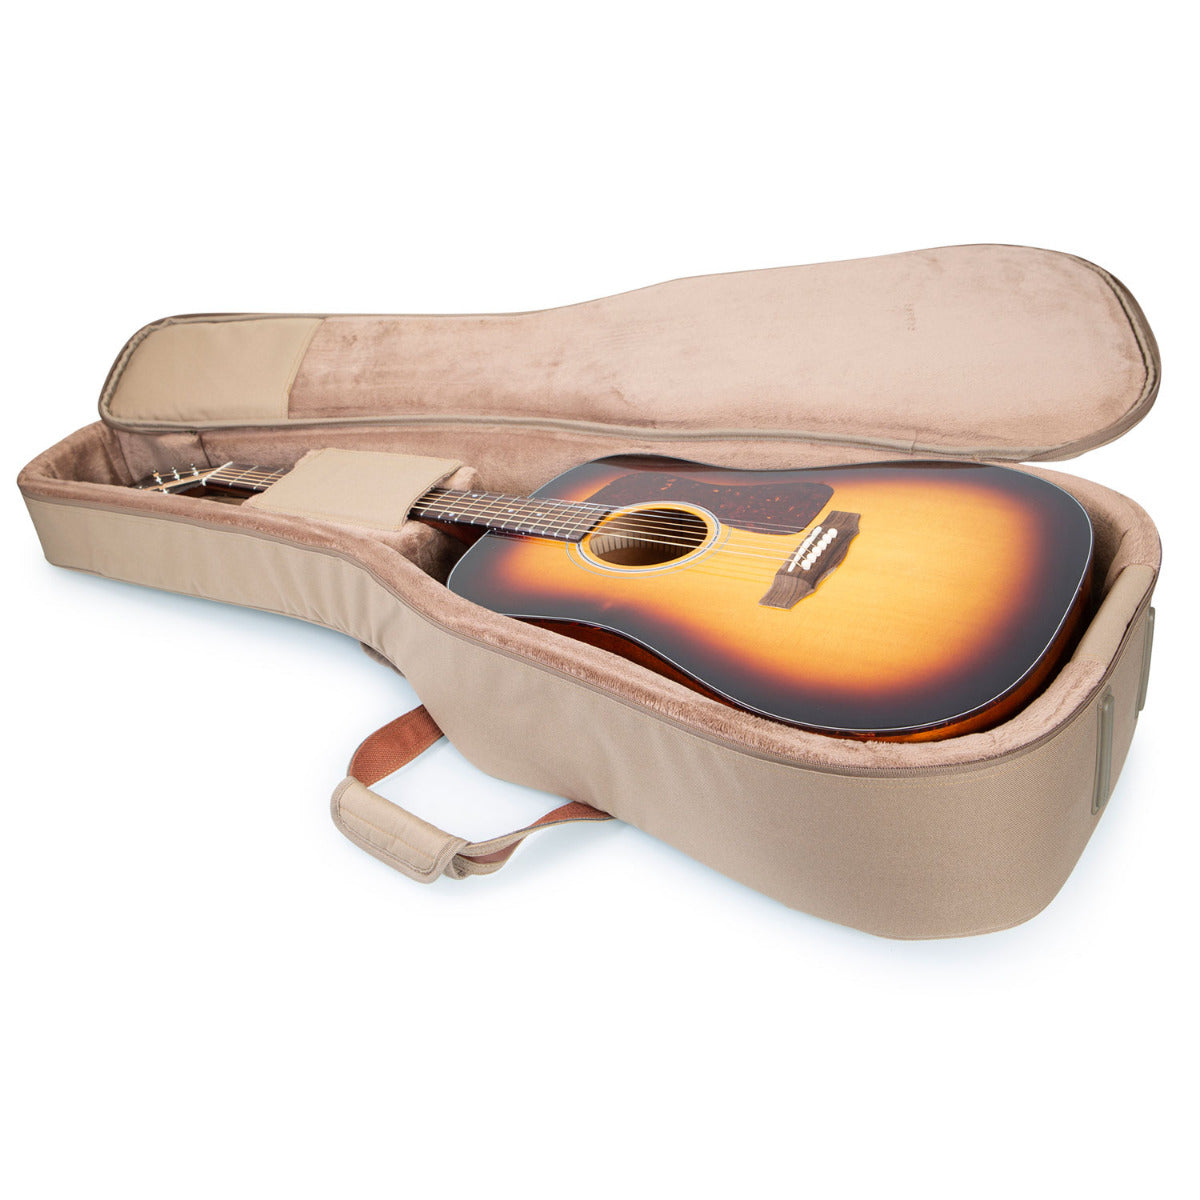 Image of a Levy's Deluxe Dreadnaught Gig Bag open with guitar in it.